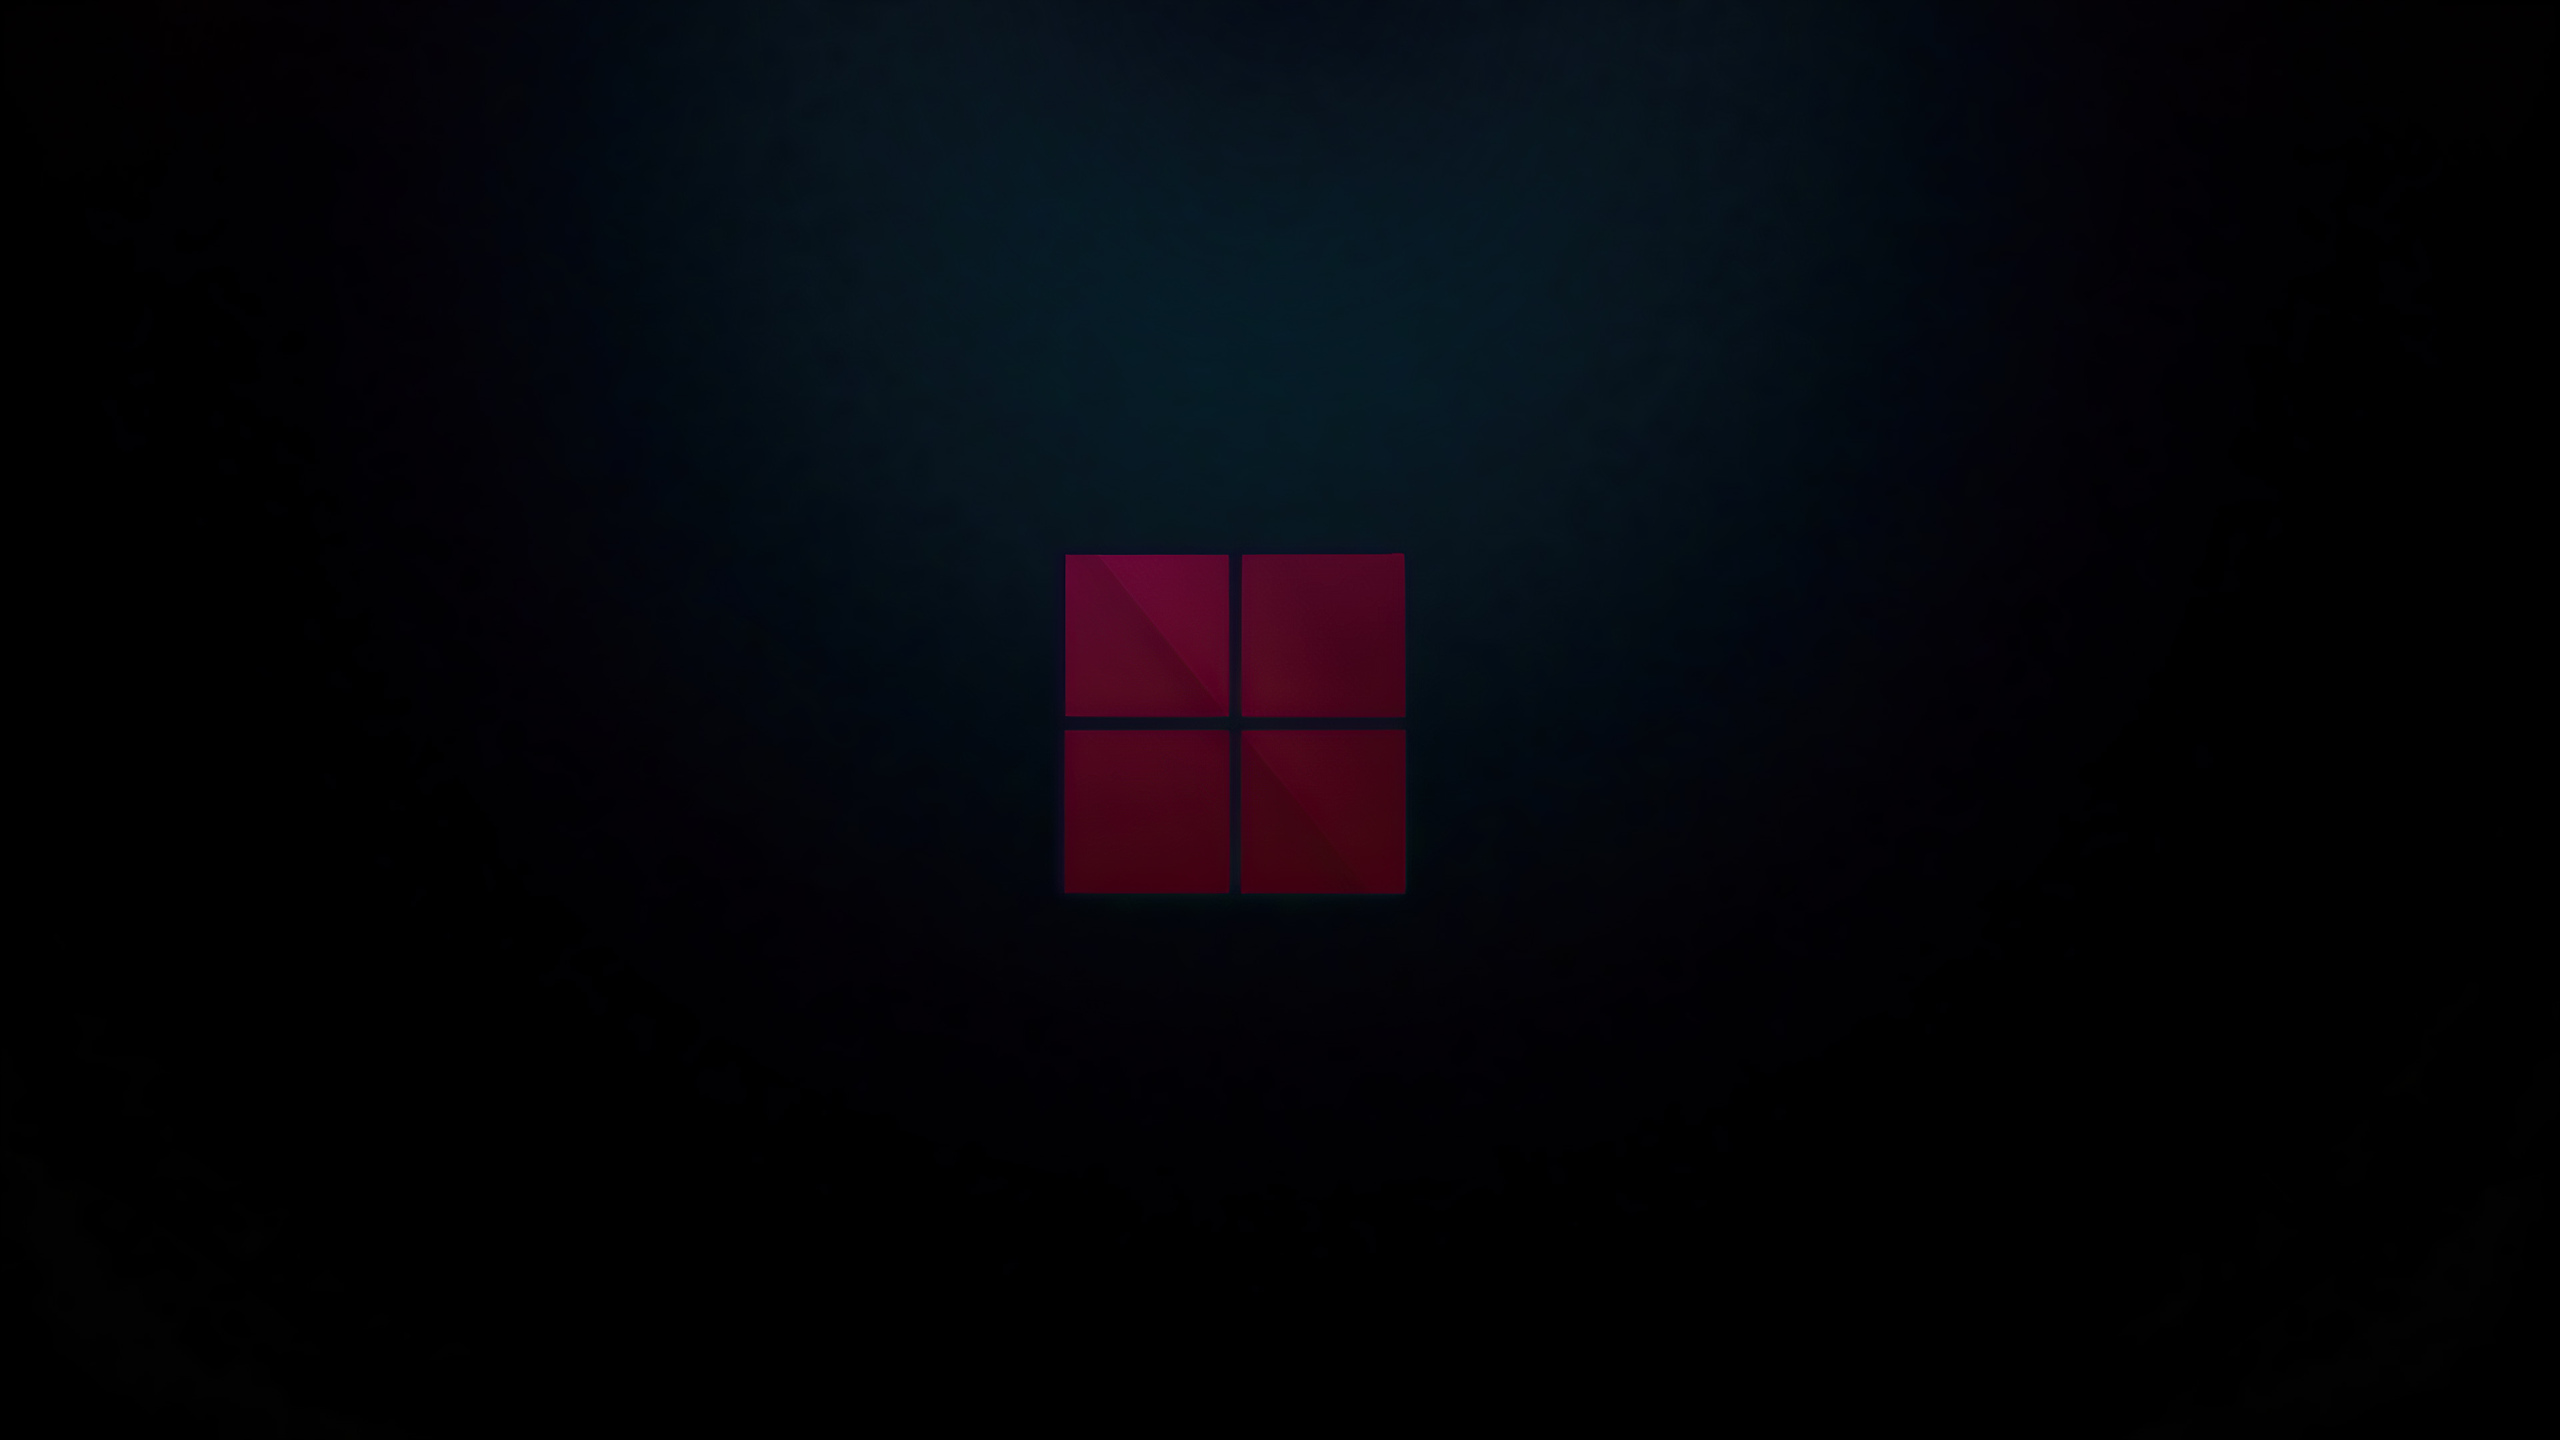 How To Get All 26 Windows 11 Wallpapers In 4k 1920x1080 1080p Laptop